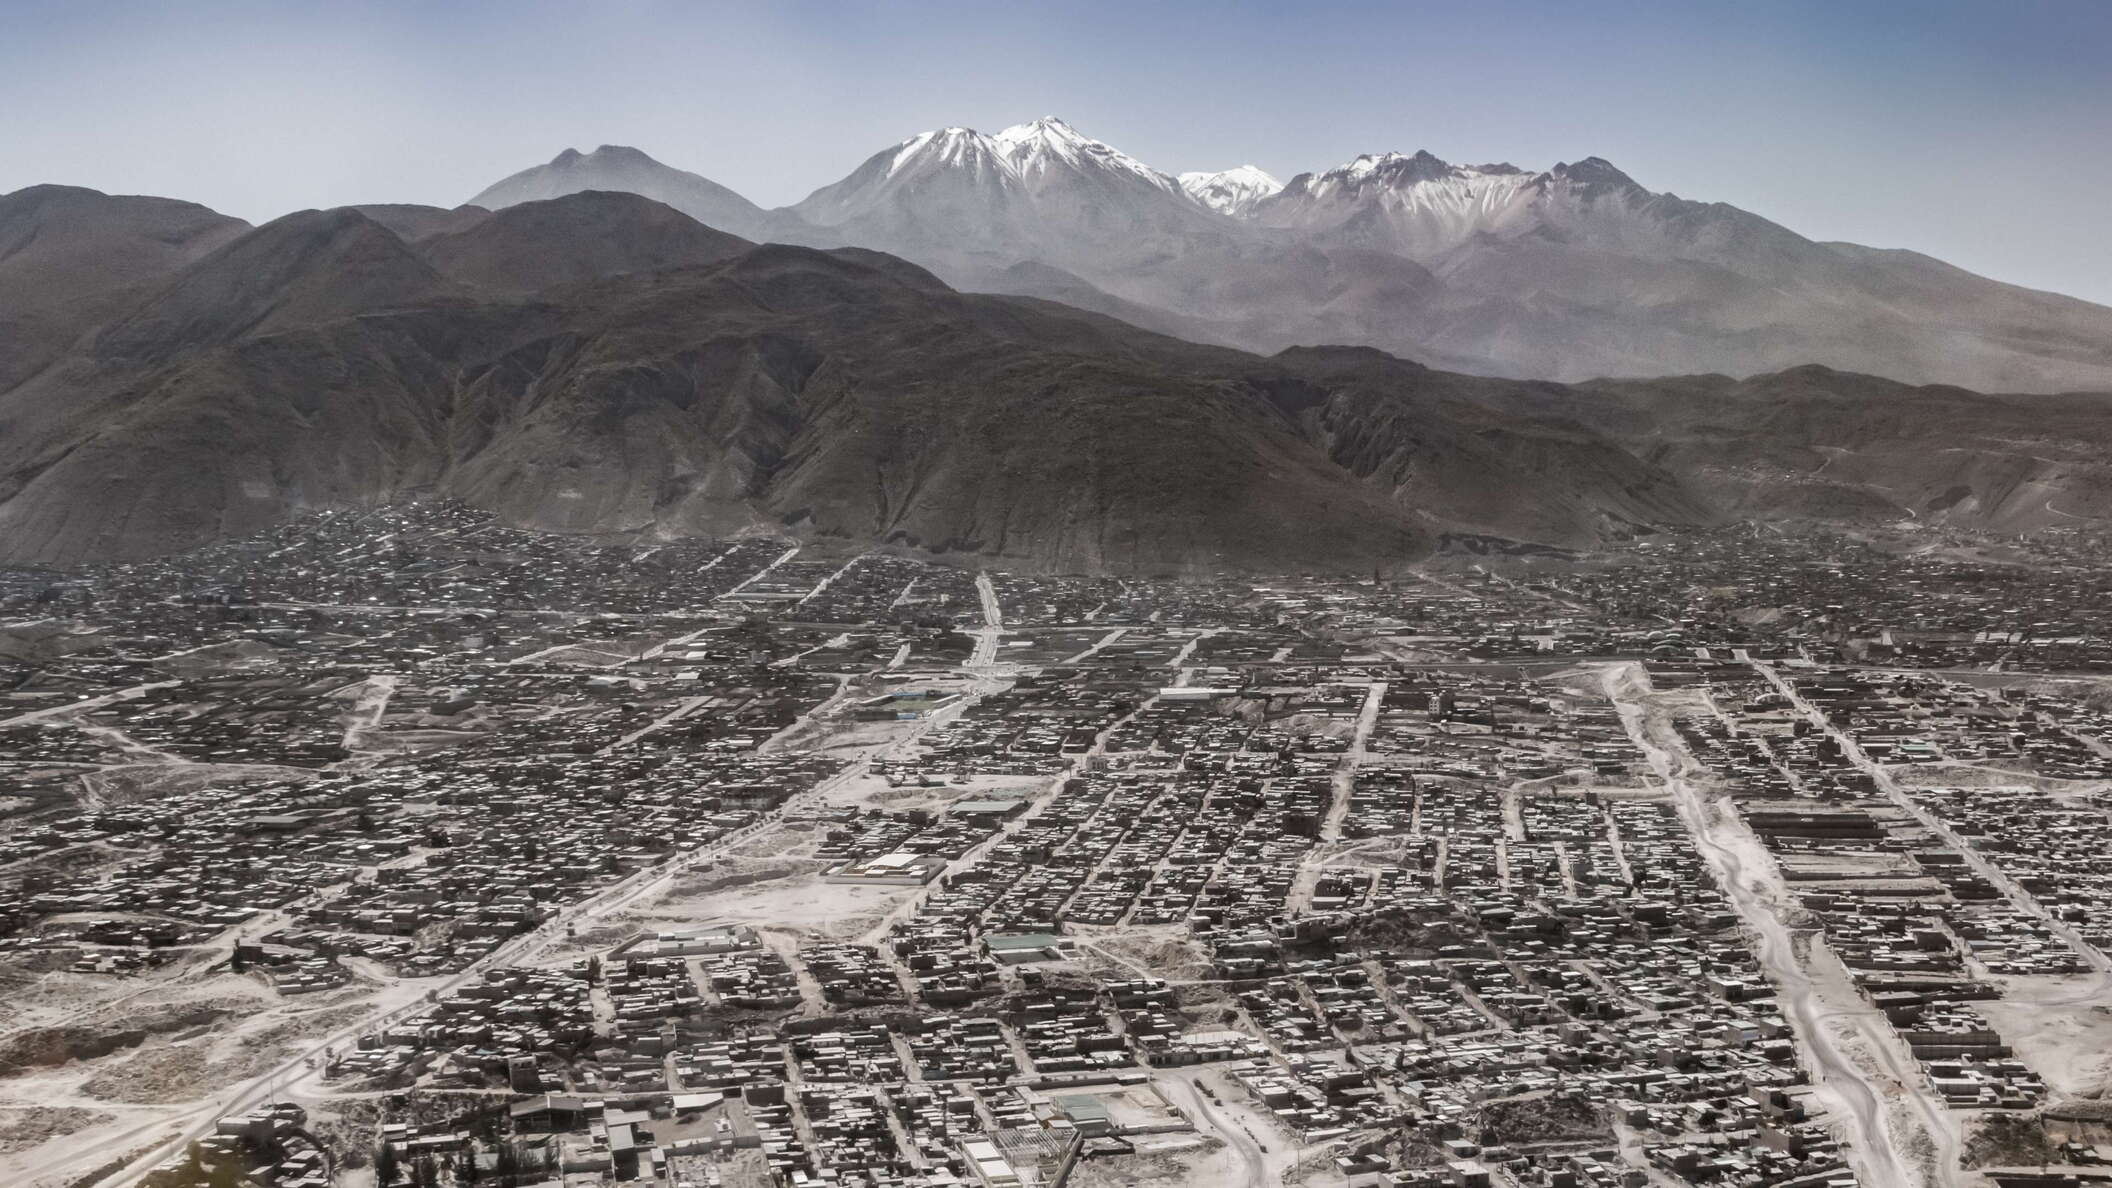 Suburbs of Arequipa with Chachani